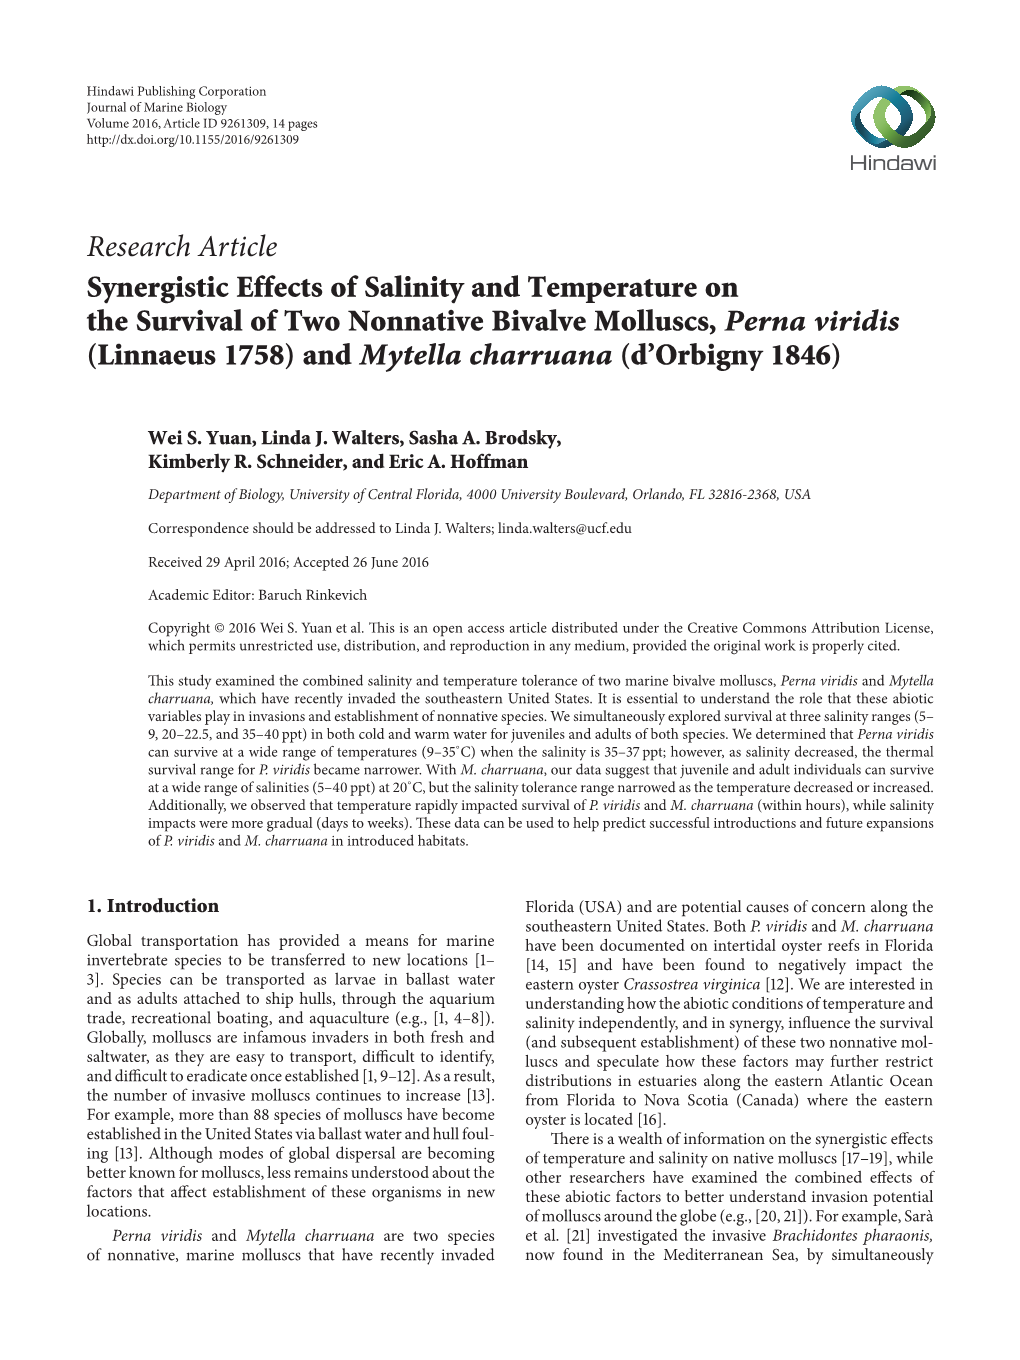 Synergistic Effects of Salinity and Temperature on the Survival of Two